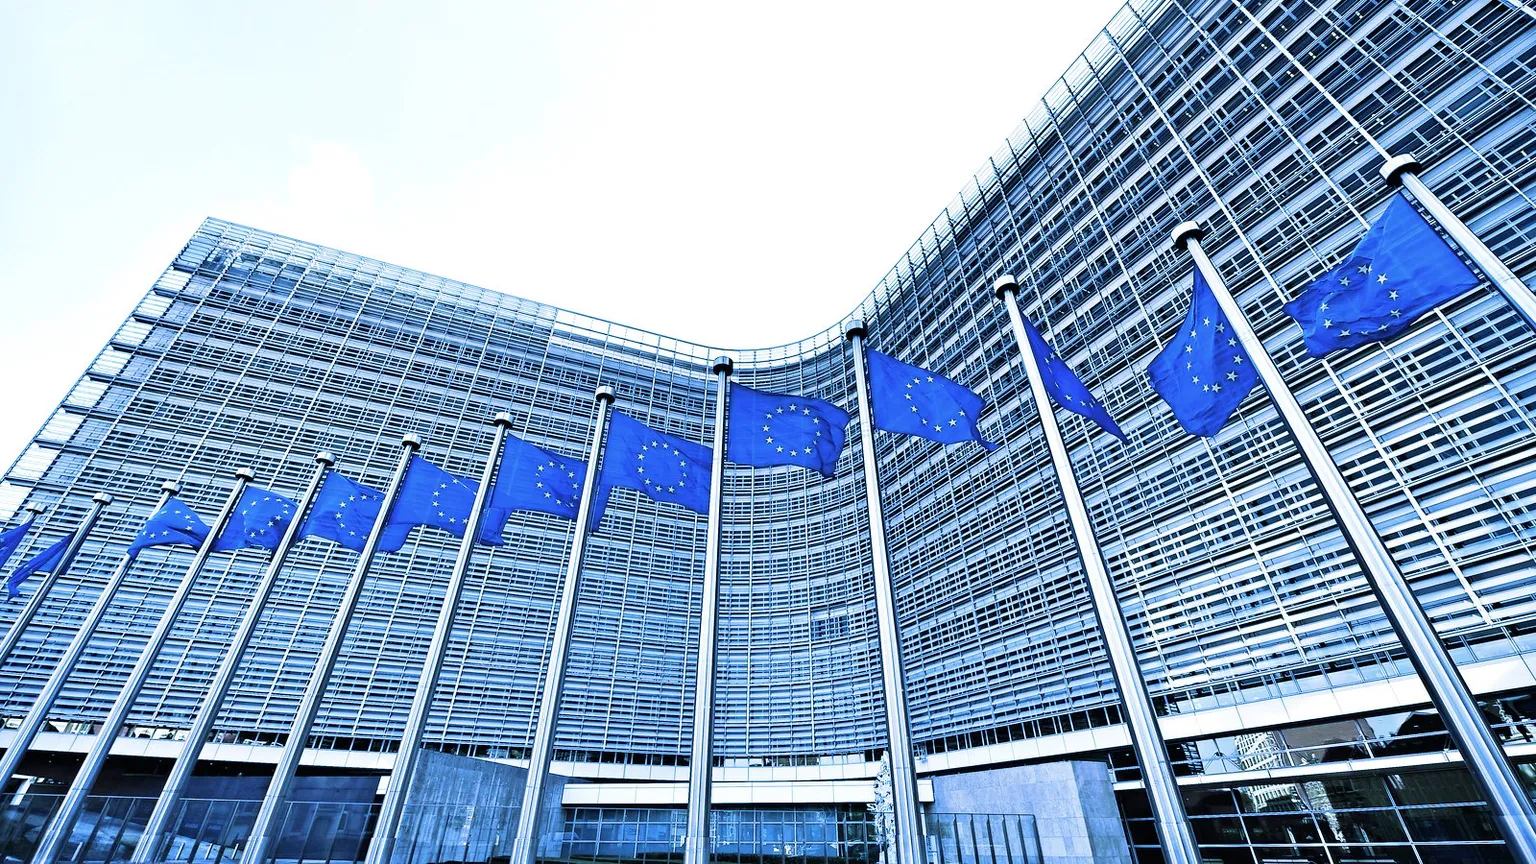 The European Commission is the EU's executive branch. Image: Shutterstock.